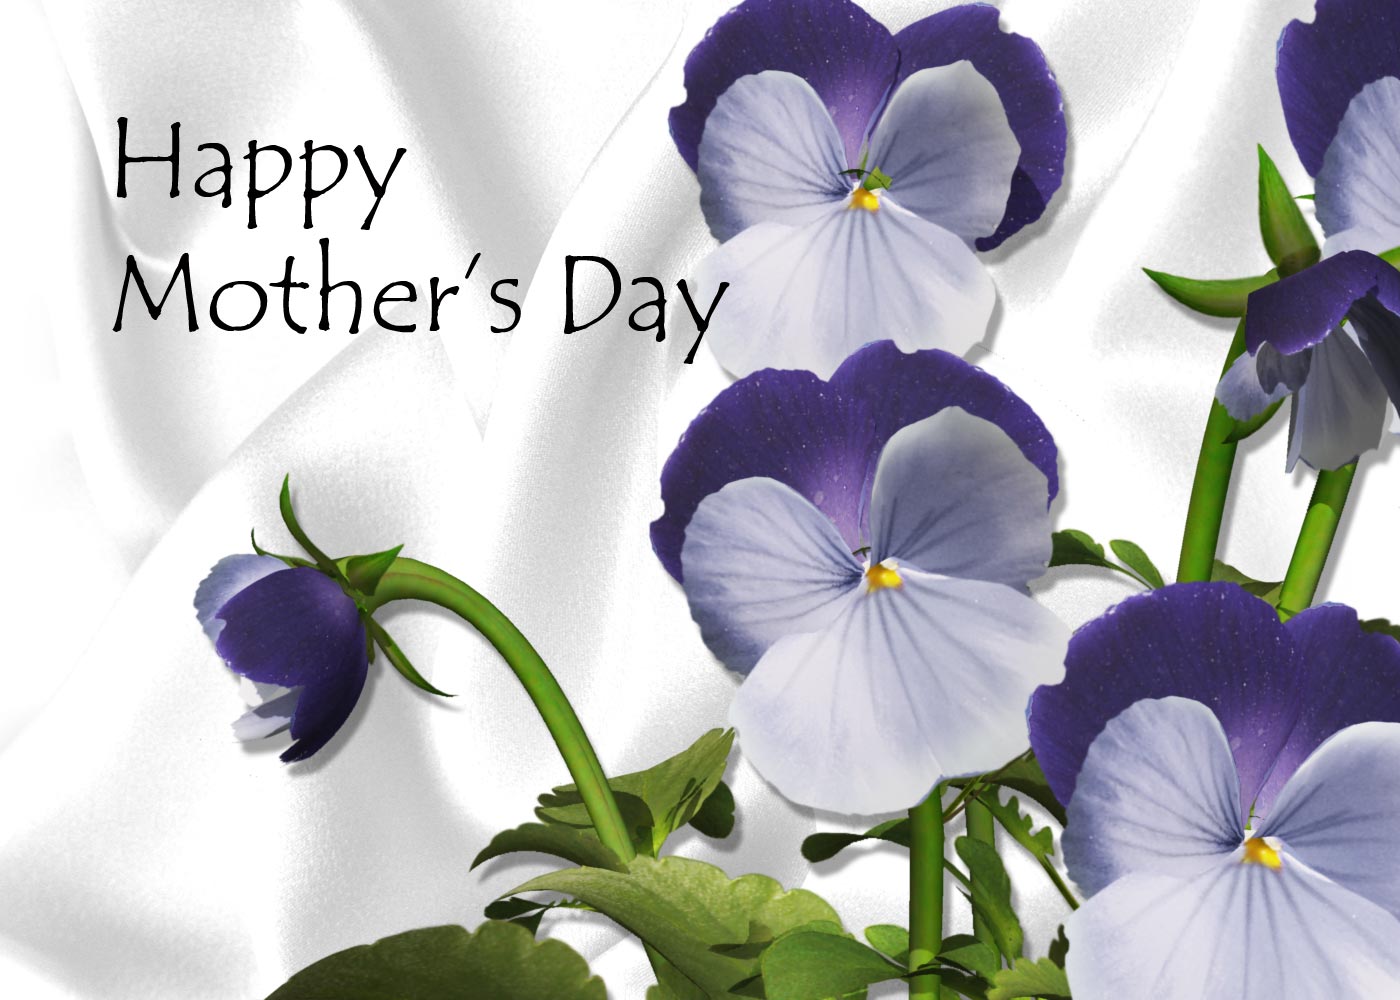 Mothers Day Card Ideas - Purple Pansies.